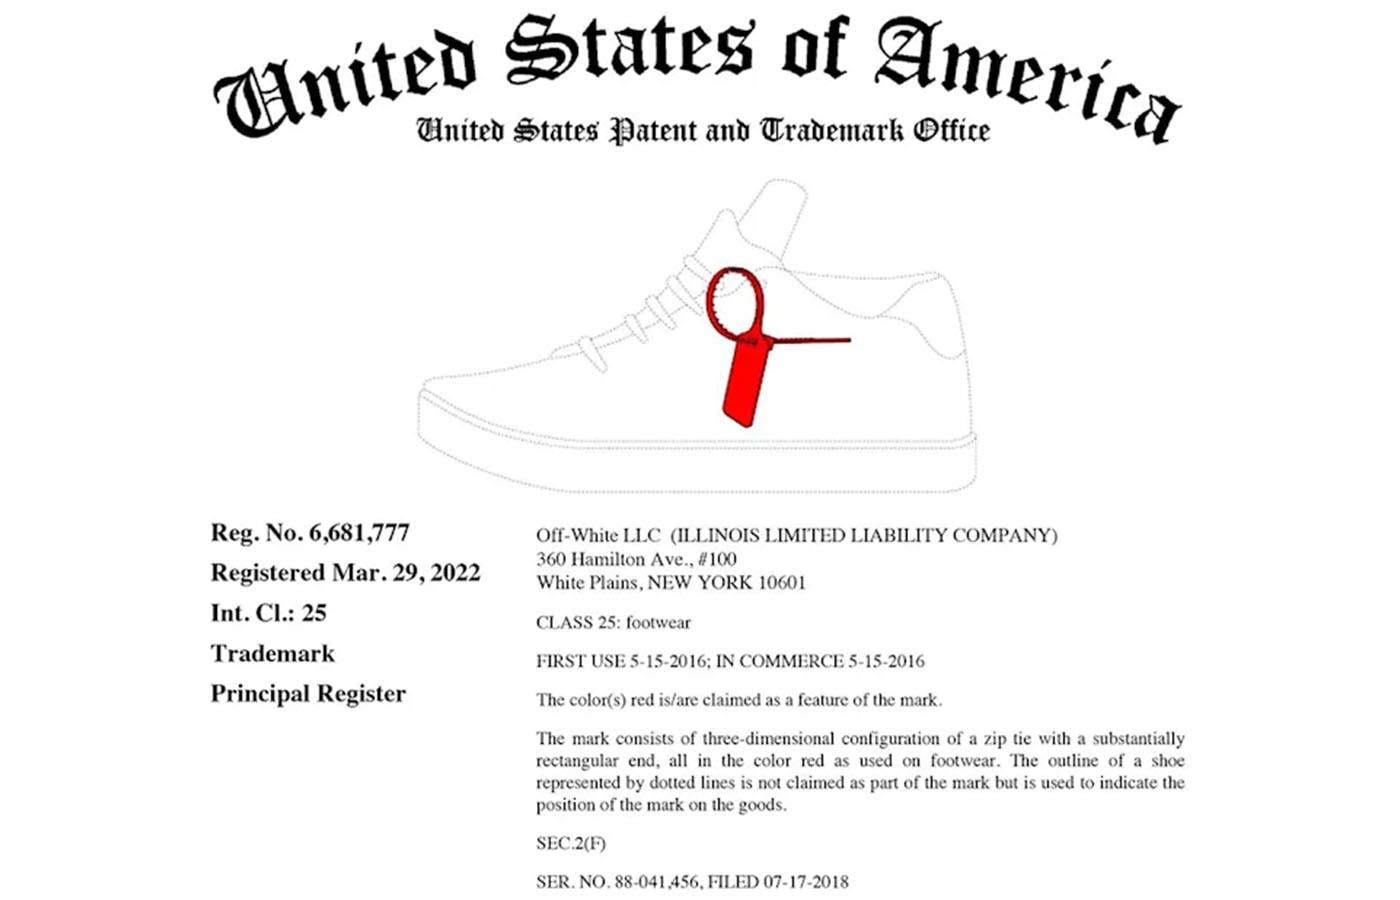 Off-White Secures Trademark Rights for its Red Zip Tie United States Patent and Trademark Office